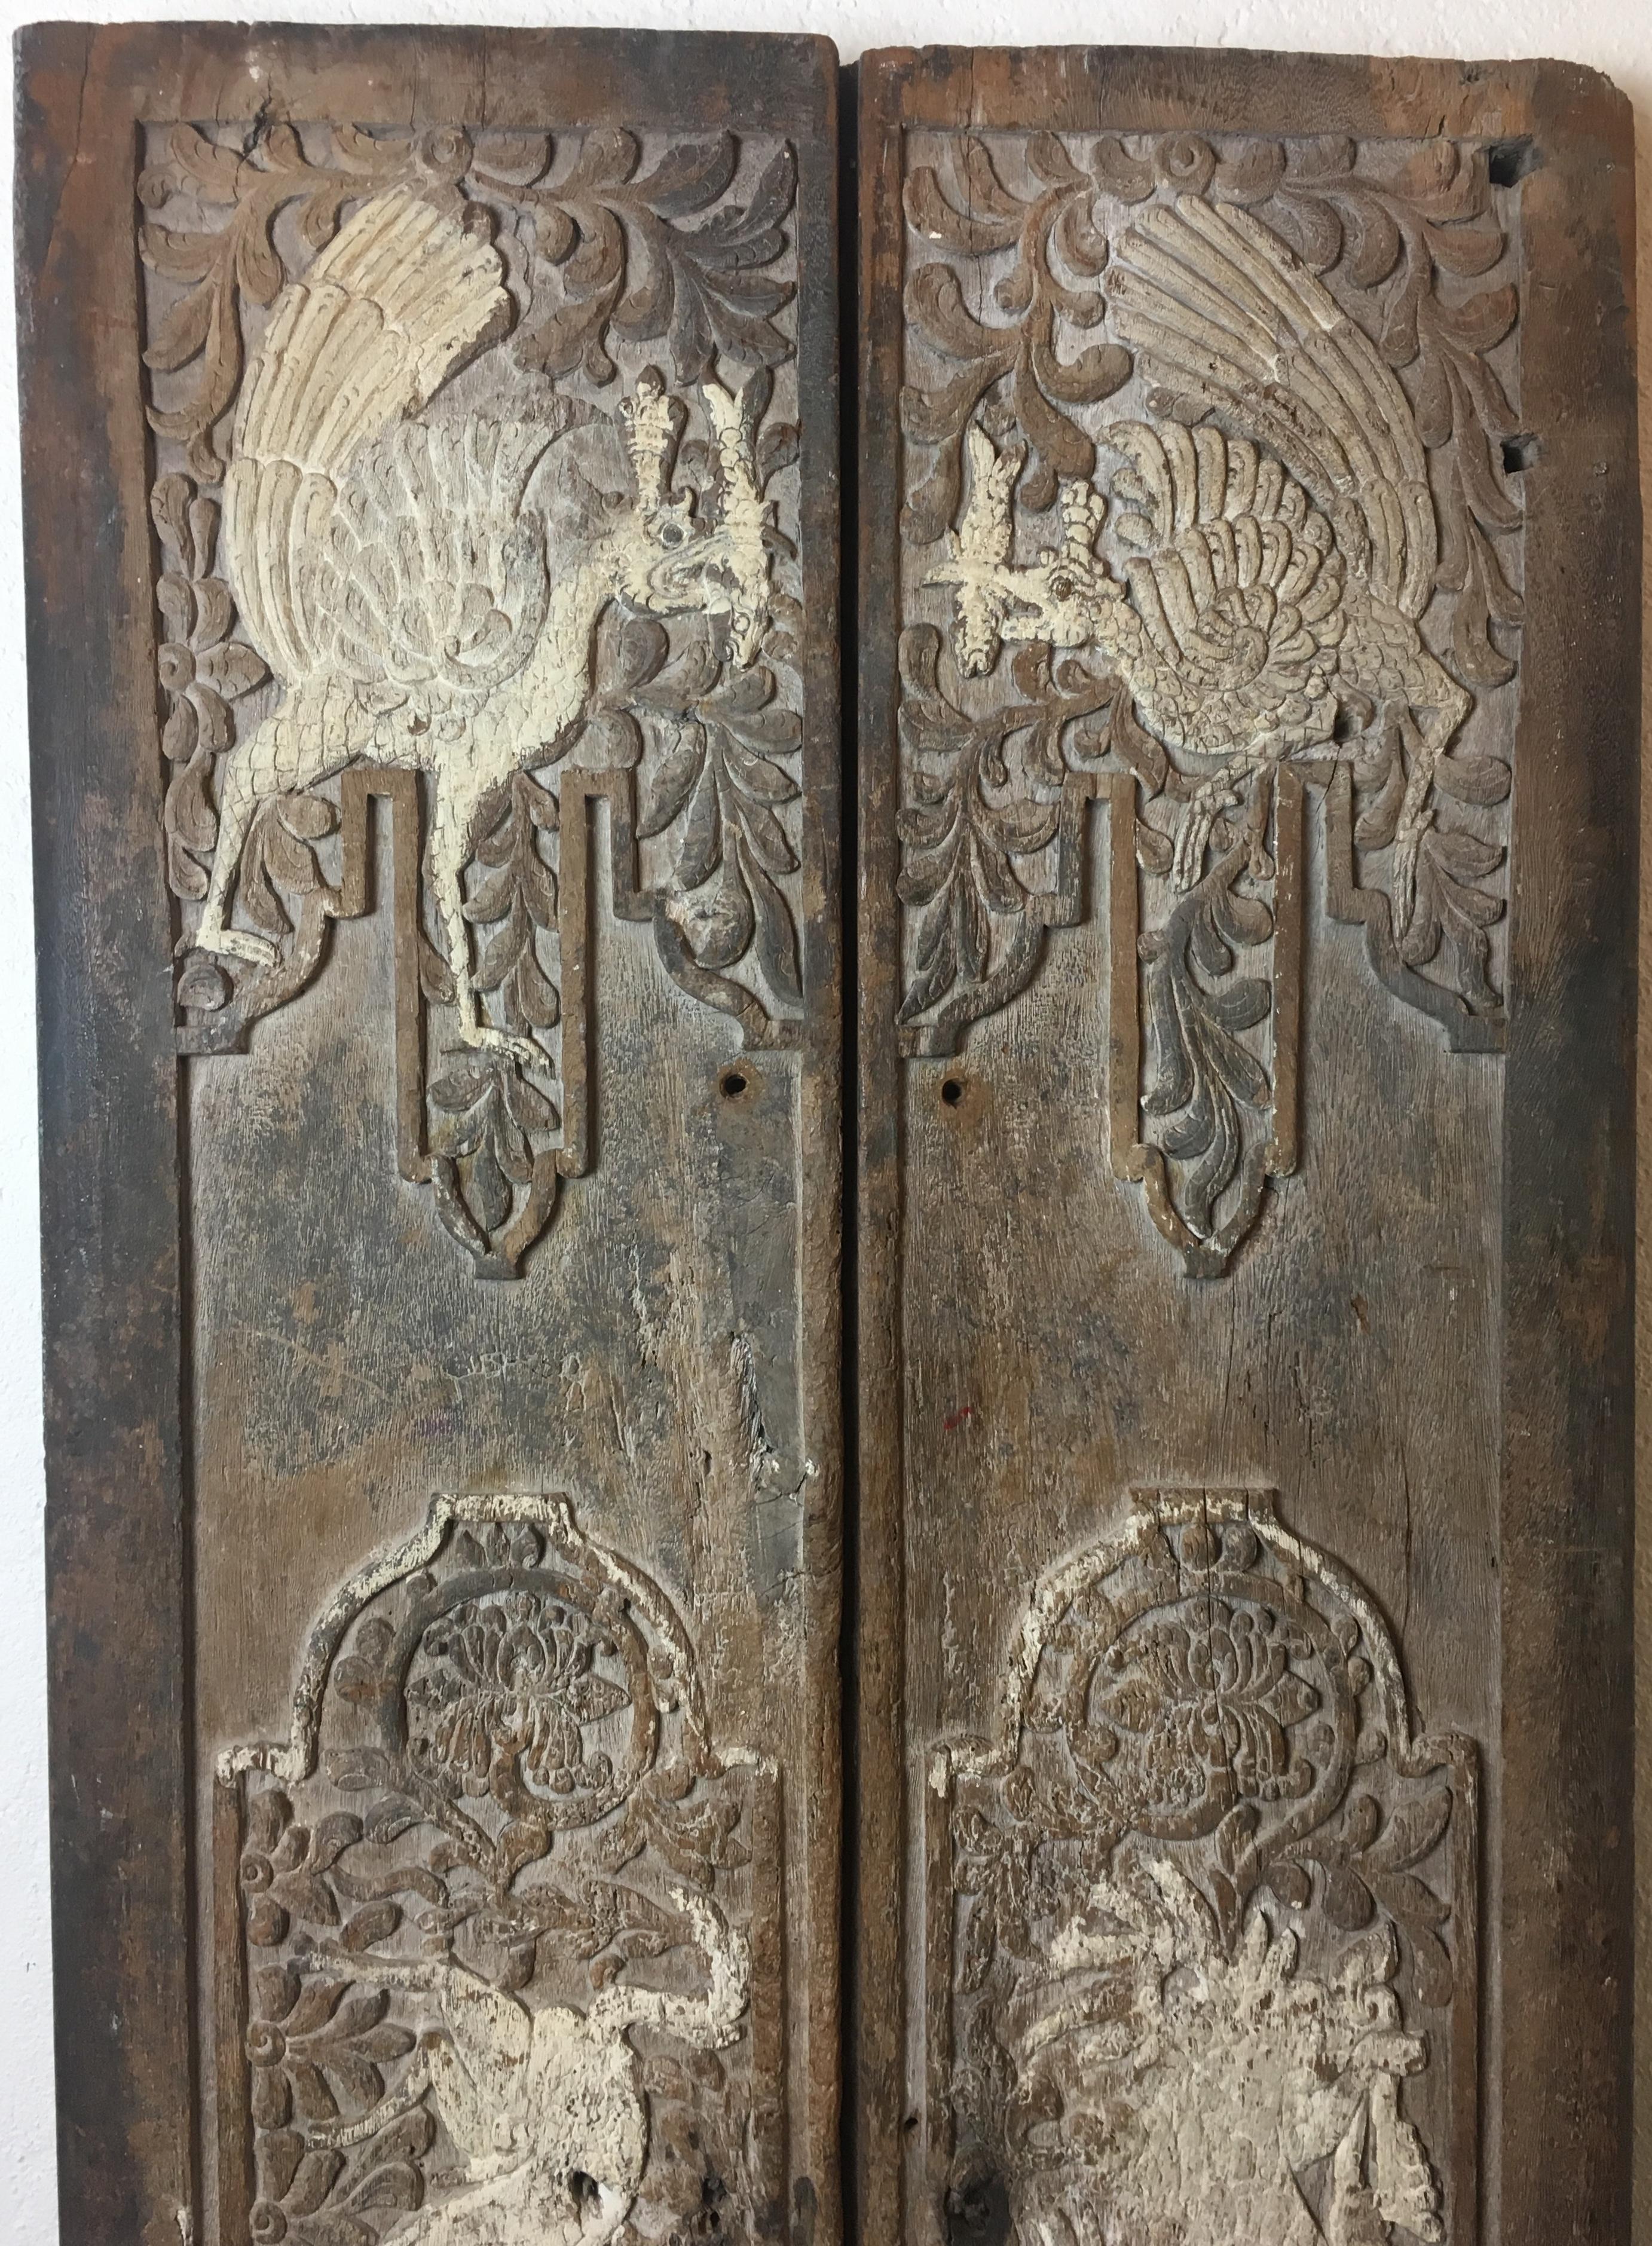 Antique Chinese architectural hand-carved doors or decorative wall panels from the 17th Century in completely organic form, original condition. These doors have a remarkable patina and are very decorative. 

The hand carvings in high relief and